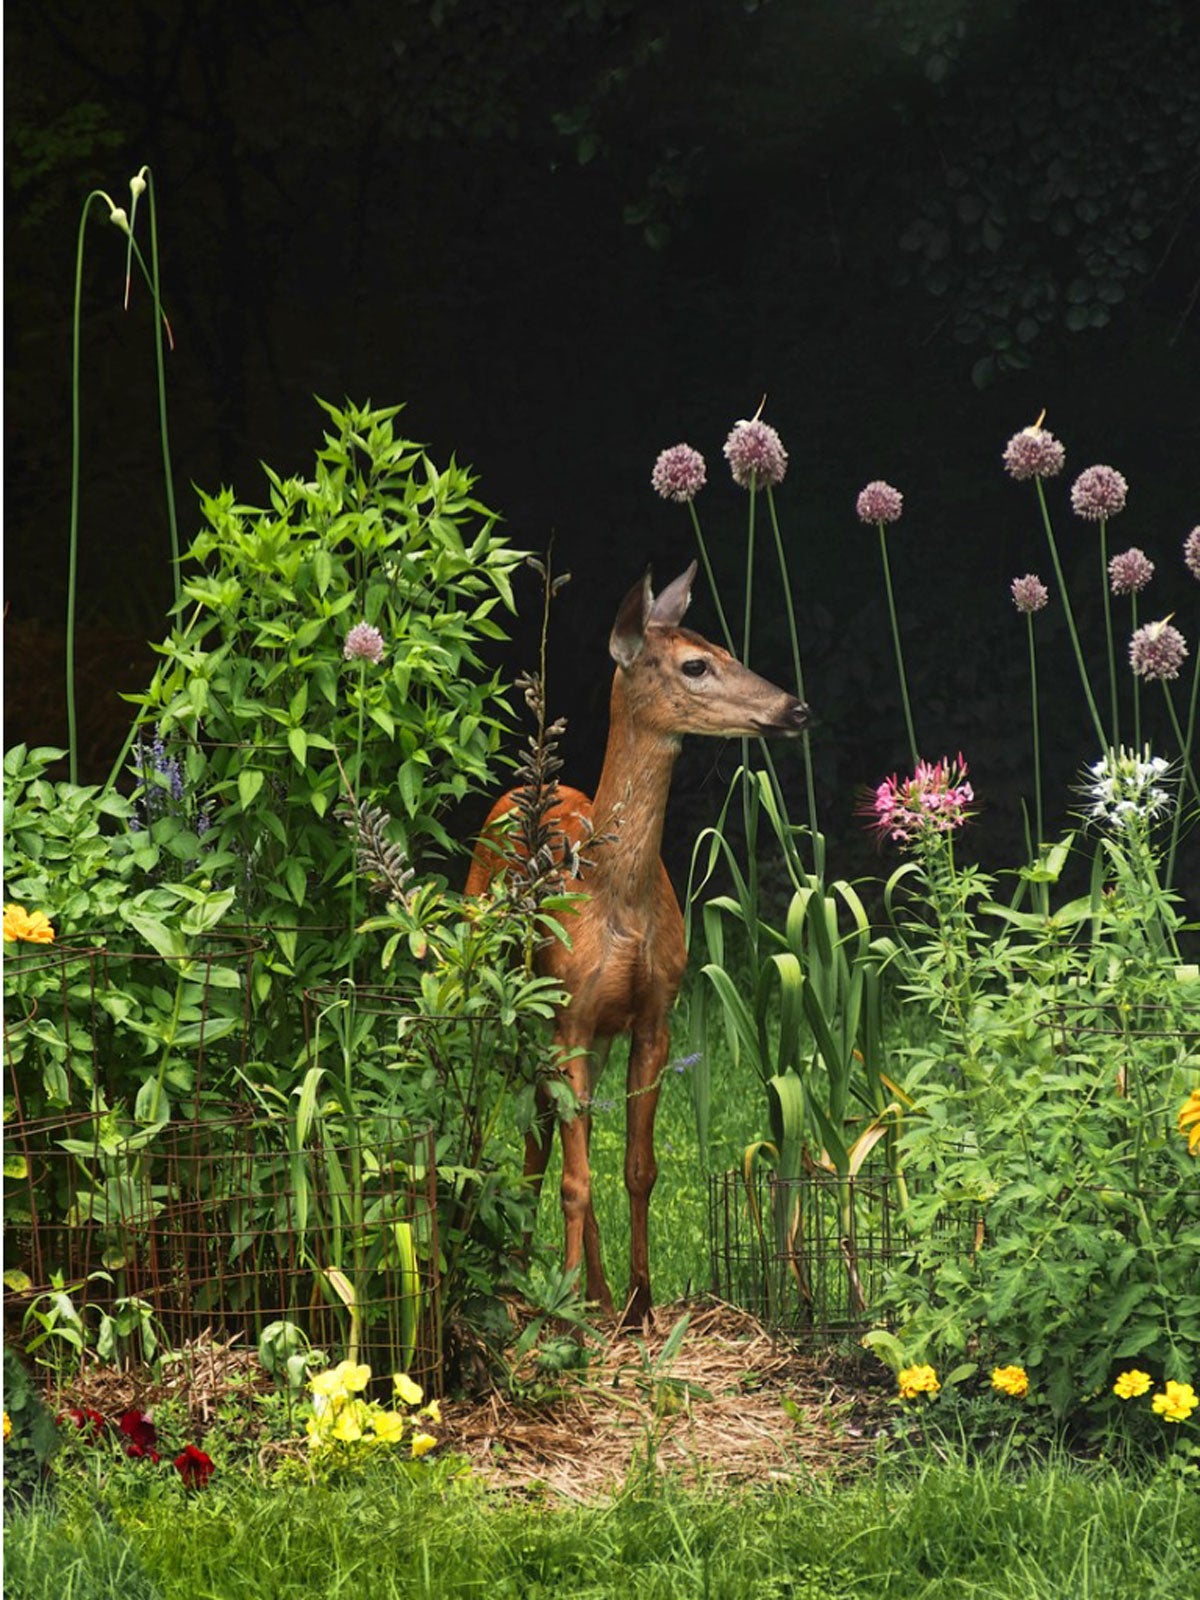 Deterring Wildlife Pests - Camouflaging Gardens To Keep Out Animals